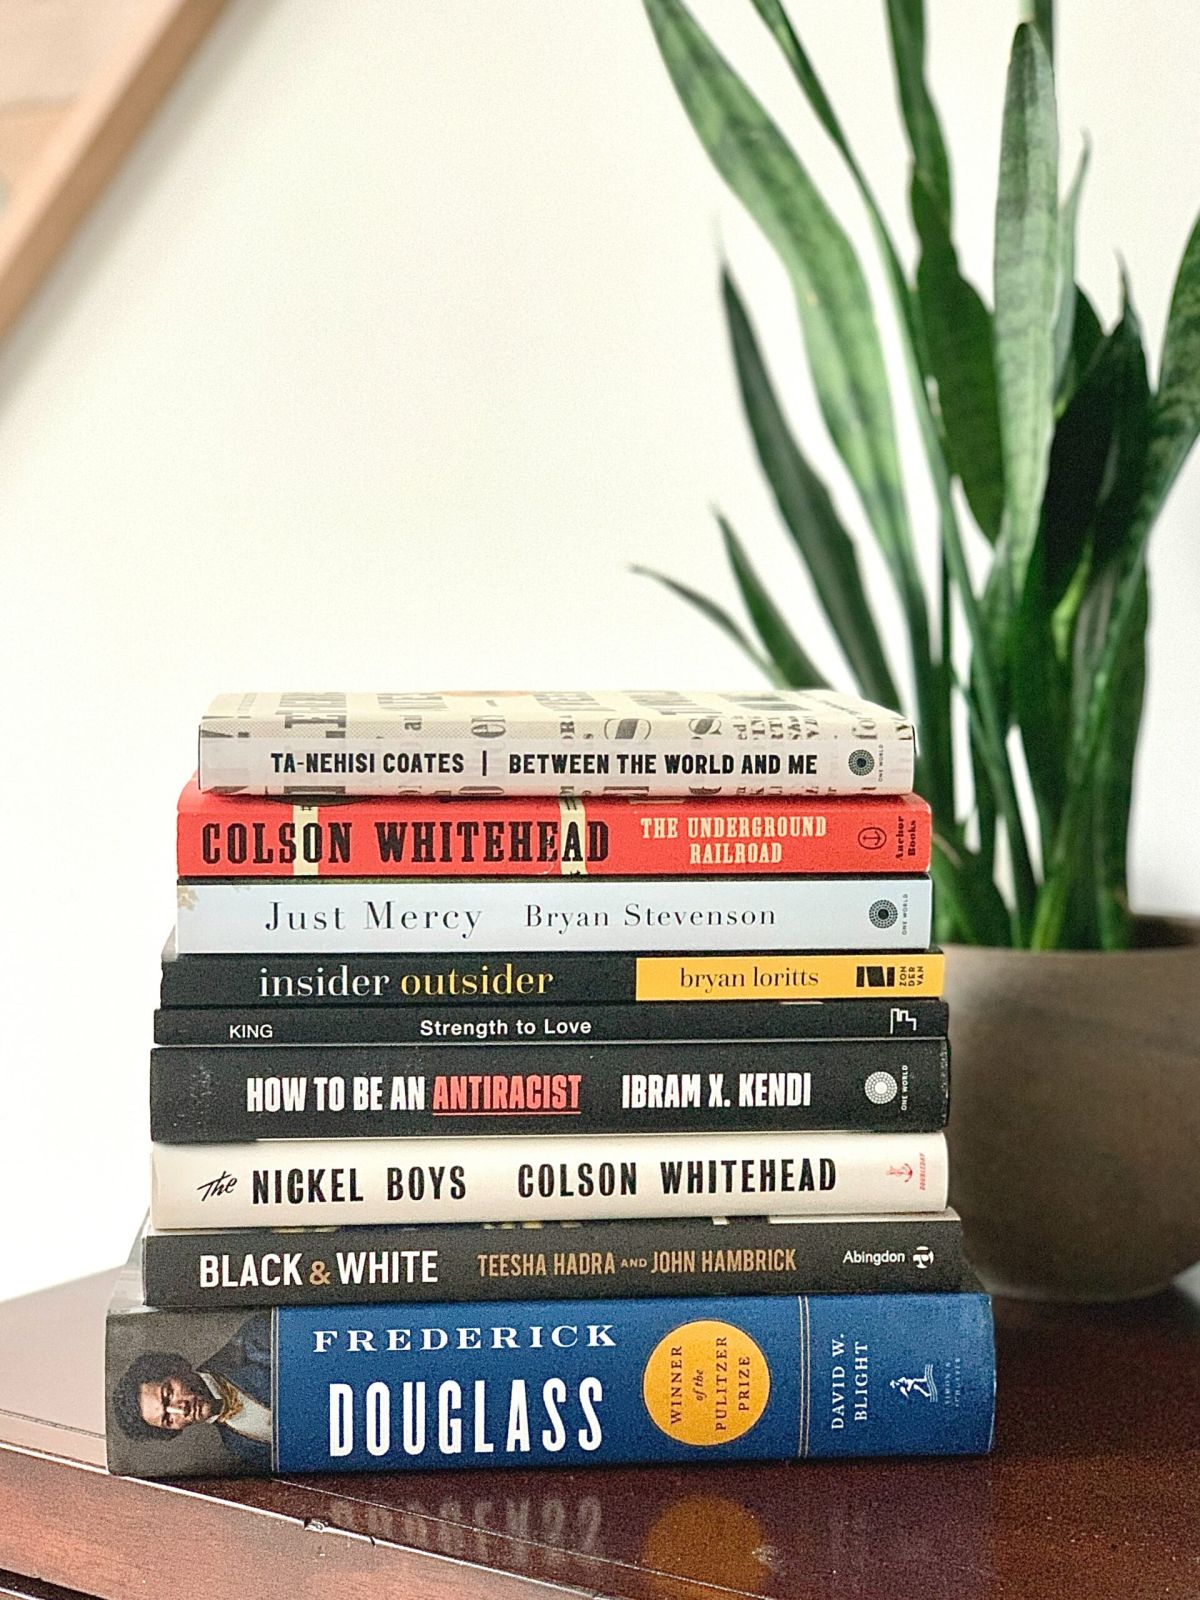 Thinking about reading: How Black history month can shape our reading for the better